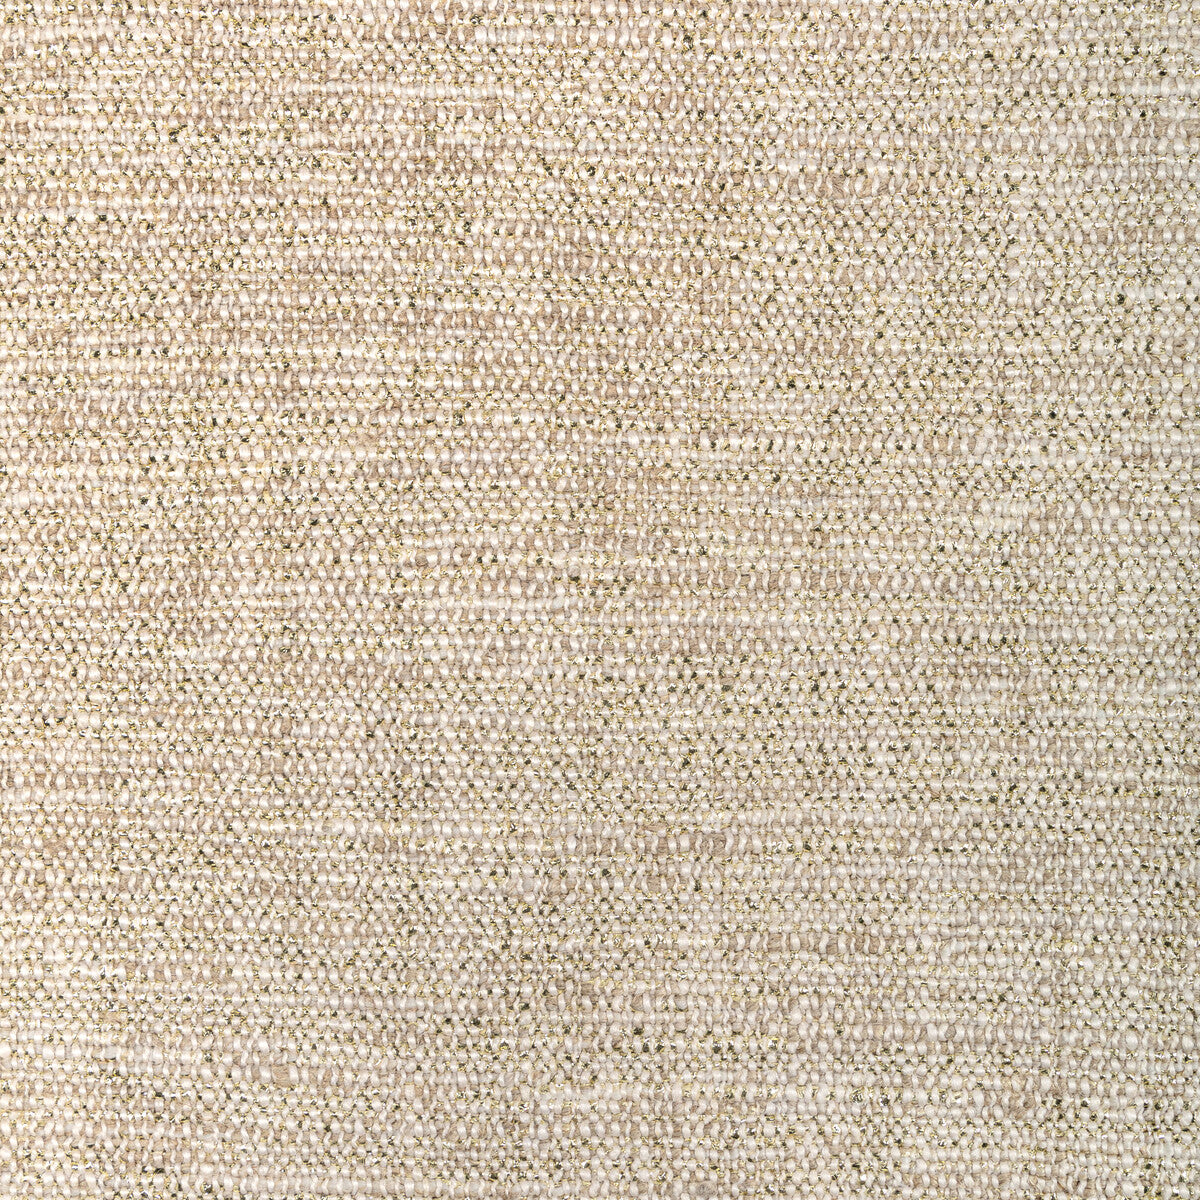 Heavy Metal fabric in natural gold color - pattern 36328.4.0 - by Kravet Couture in the Modern Luxe III collection